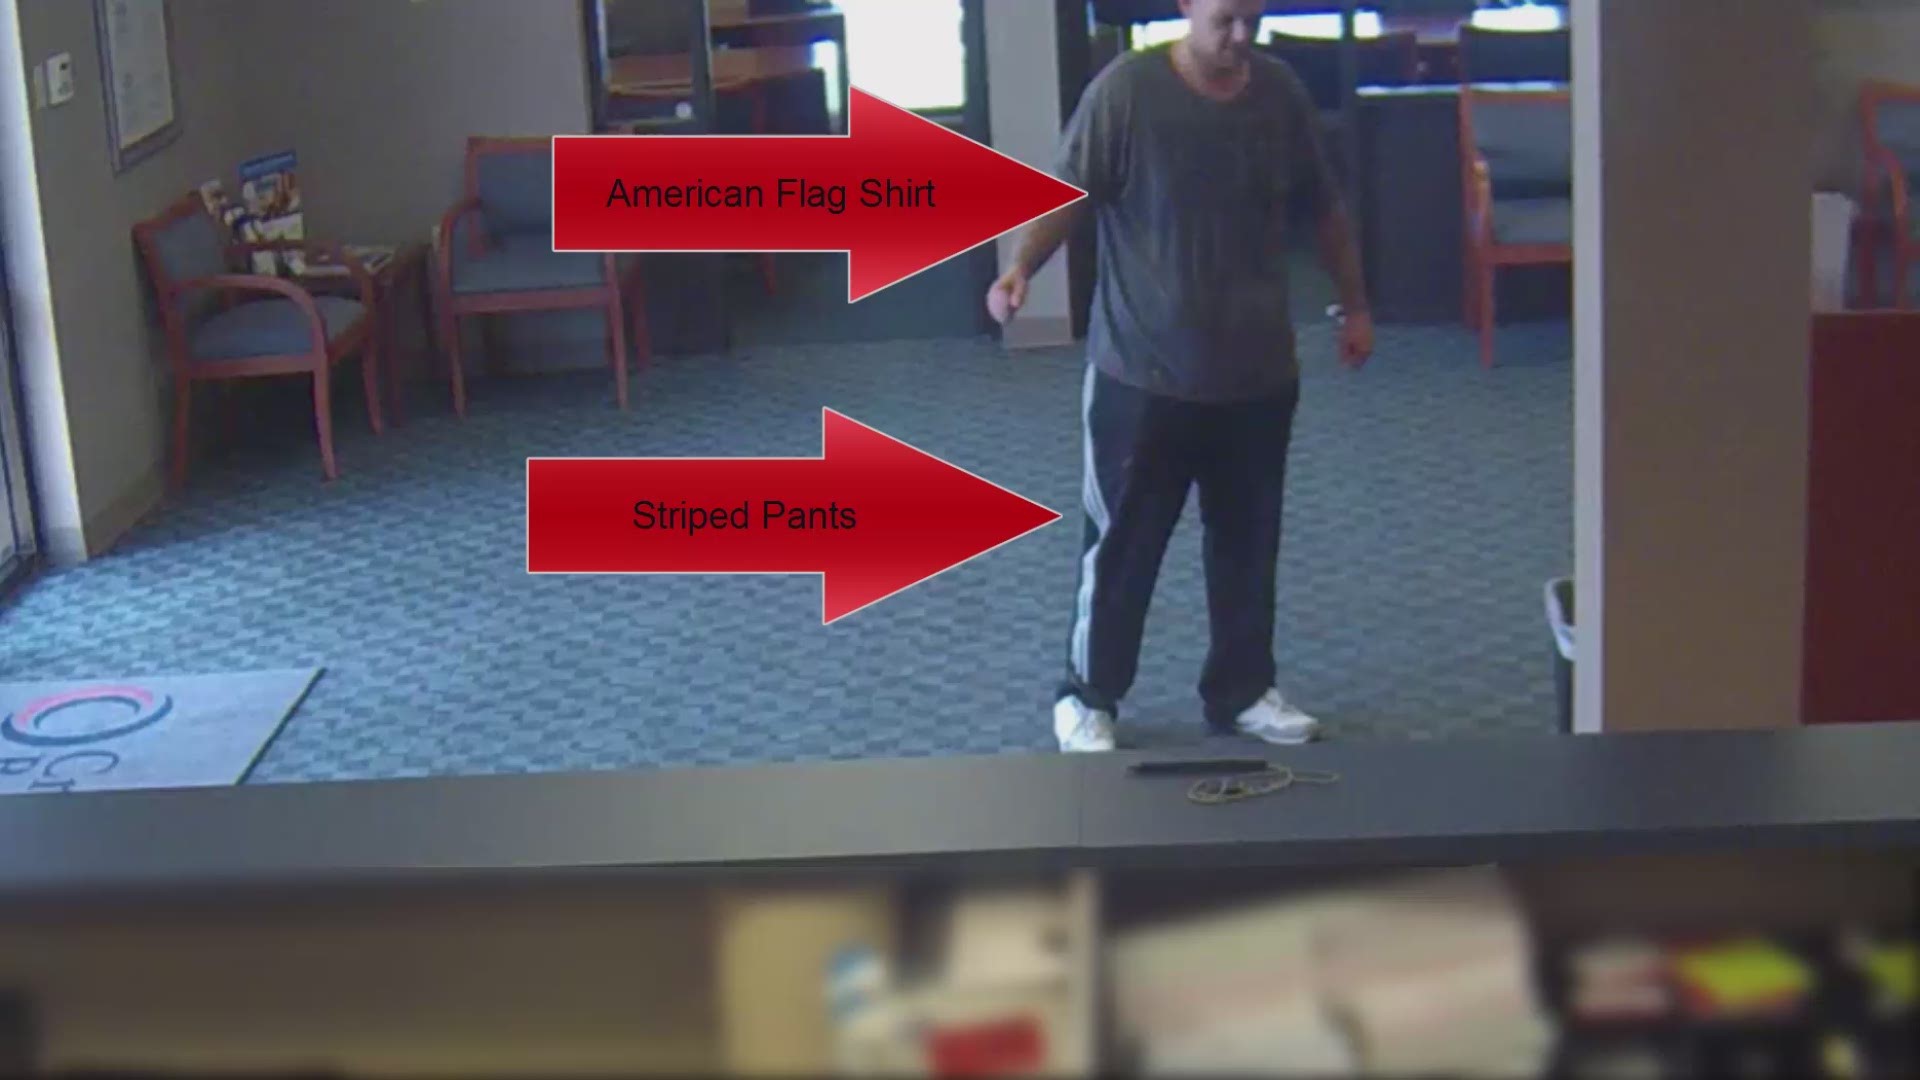 Surveillance video shows the suspect wearing an American flag shirt and striped pants with several tattoos.